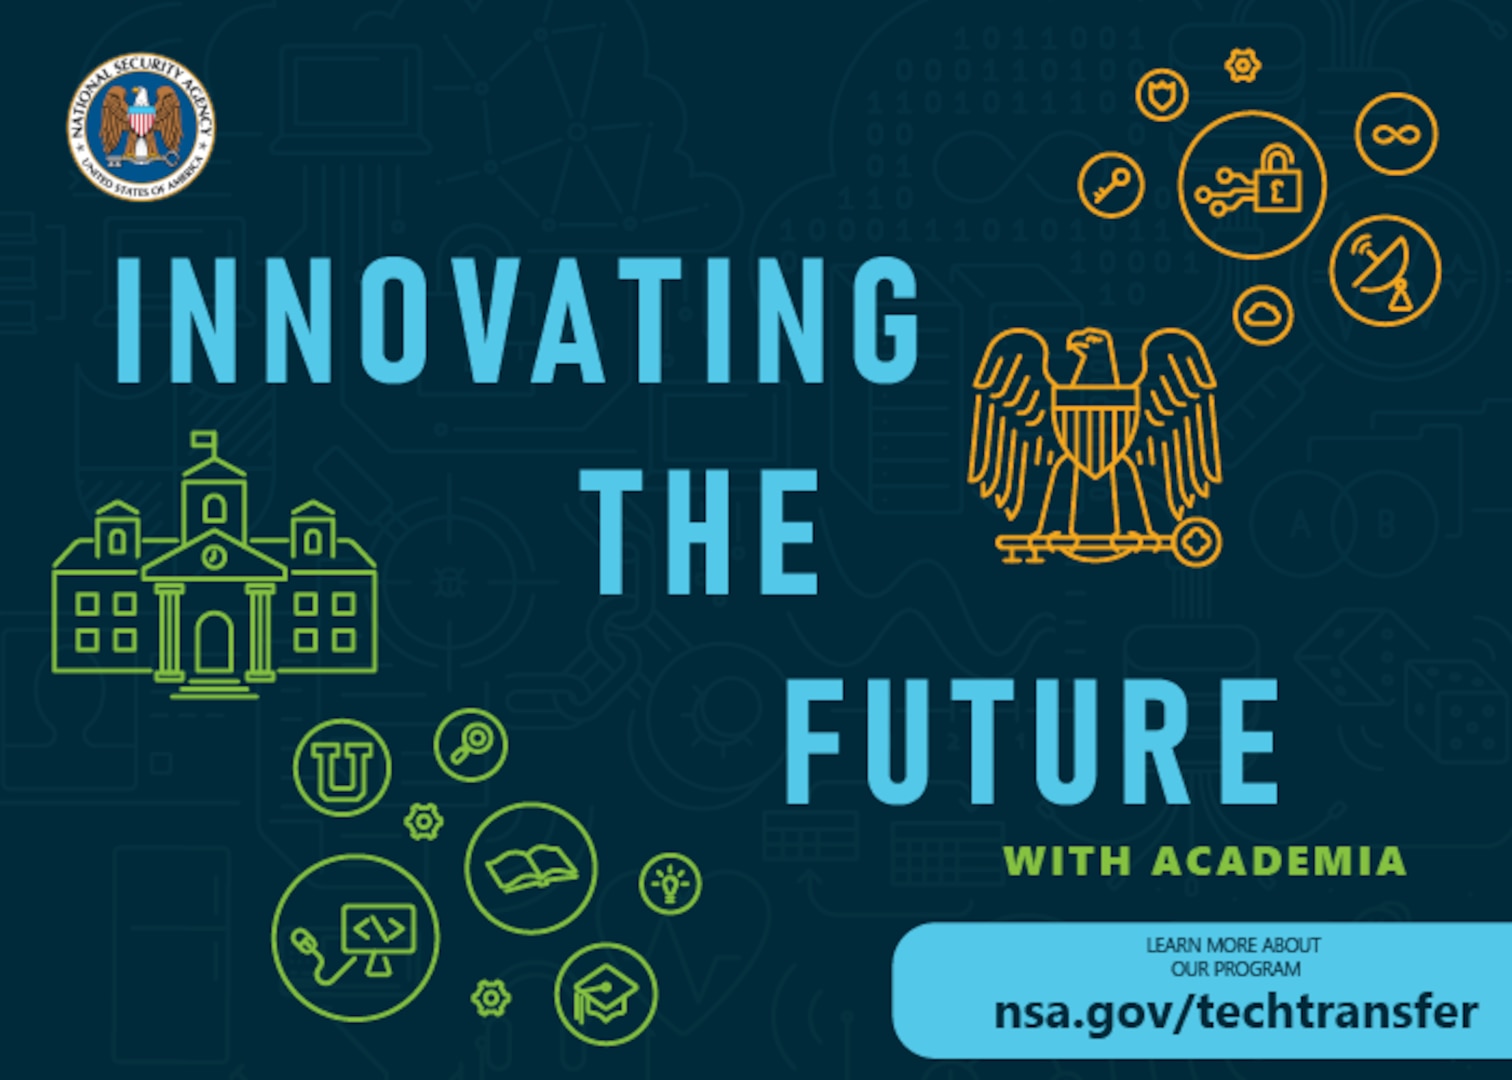 Innovating the Future with Academia